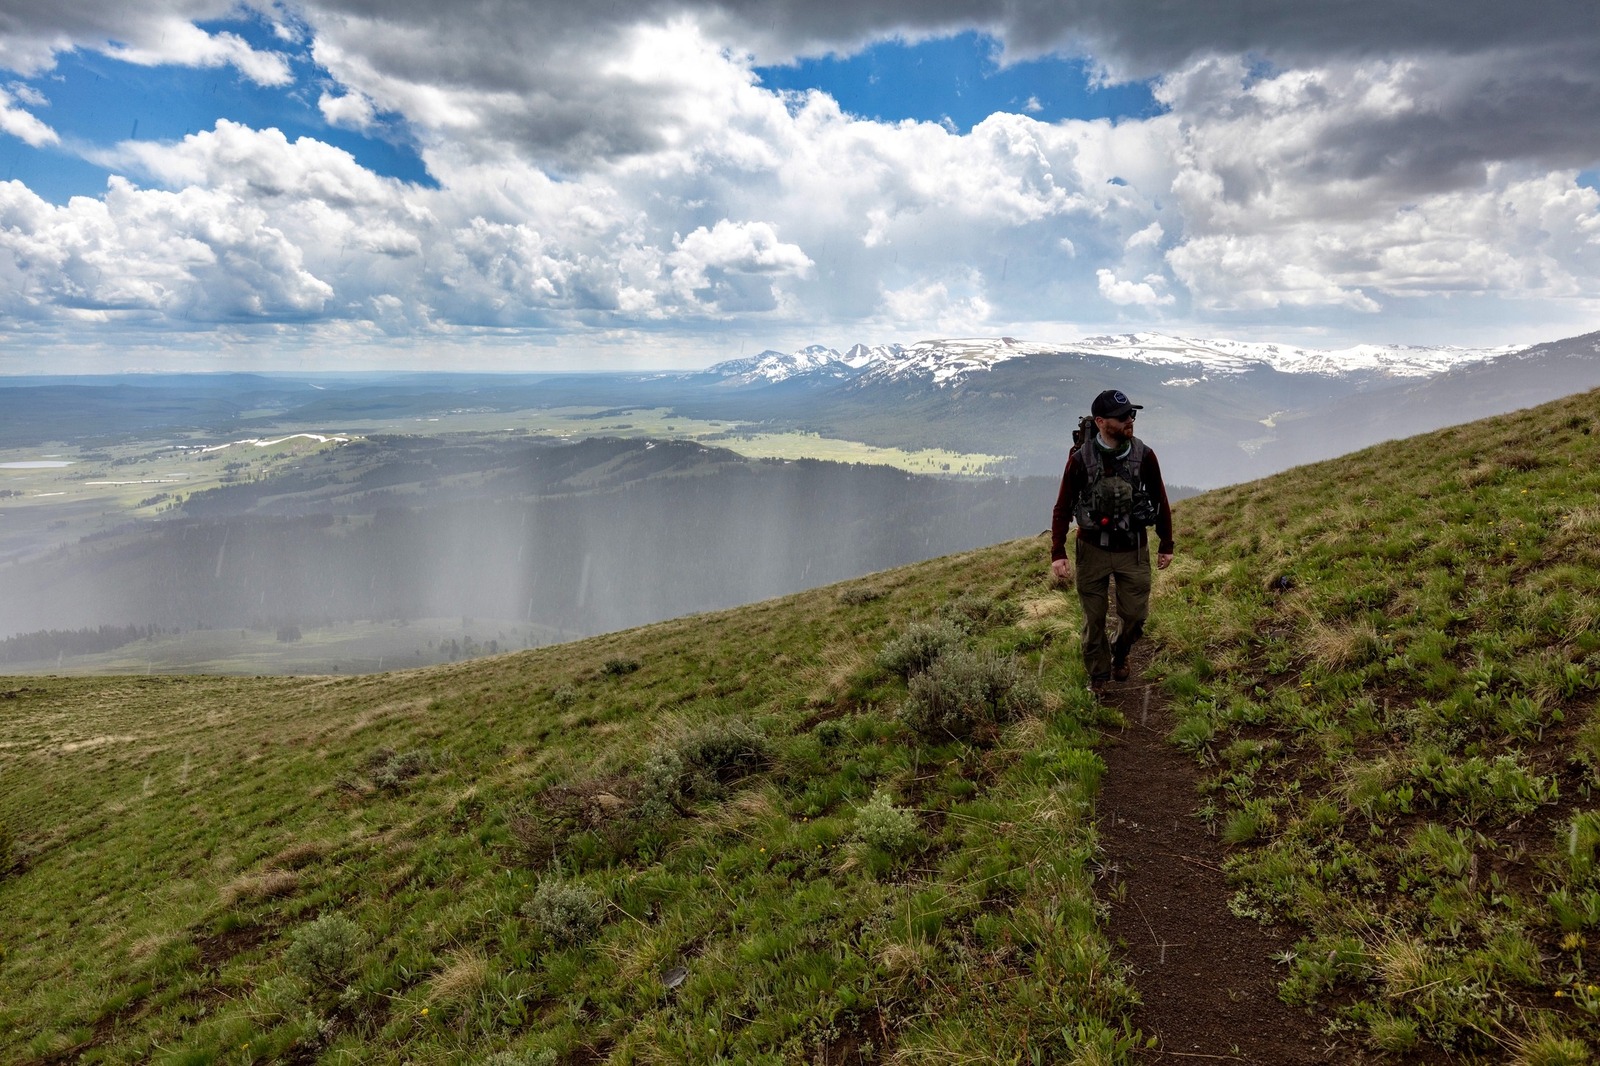 A hiker in the Yellowstone backcountry. Photo by Jacob W. Frank/NPS